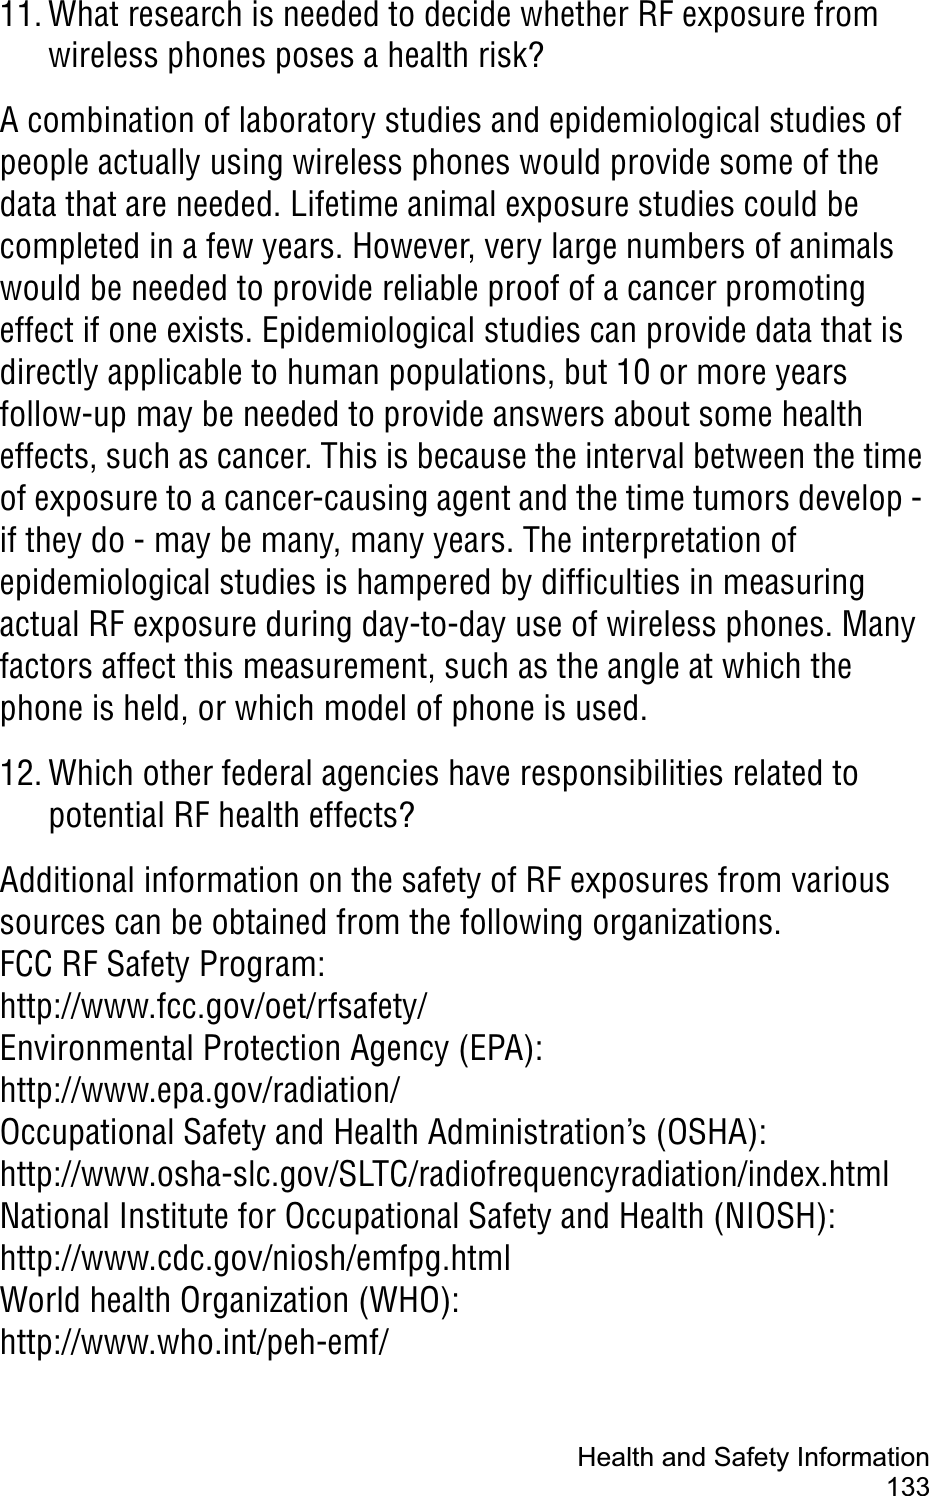 Health and Safety Information13311. What research is needed to decide whether RF exposure from wireless phones poses a health risk?A combination of laboratory studies and epidemiological studies of people actually using wireless phones would provide some of the data that are needed. Lifetime animal exposure studies could be completed in a few years. However, very large numbers of animals would be needed to provide reliable proof of a cancer promoting effect if one exists. Epidemiological studies can provide data that is directly applicable to human populations, but 10 or more years follow-up may be needed to provide answers about some health effects, such as cancer. This is because the interval between the time of exposure to a cancer-causing agent and the time tumors develop - if they do - may be many, many years. The interpretation of epidemiological studies is hampered by difficulties in measuring actual RF exposure during day-to-day use of wireless phones. Many factors affect this measurement, such as the angle at which the phone is held, or which model of phone is used.12. Which other federal agencies have responsibilities related to potential RF health effects?Additional information on the safety of RF exposures from various sources can be obtained from the following organizations.FCC RF Safety Program:http://www.fcc.gov/oet/rfsafety/Environmental Protection Agency (EPA):http://www.epa.gov/radiation/Occupational Safety and Health Administration’s (OSHA):http://www.osha-slc.gov/SLTC/radiofrequencyradiation/index.htmlNational Institute for Occupational Safety and Health (NIOSH):http://www.cdc.gov/niosh/emfpg.htmlWorld health Organization (WHO):http://www.who.int/peh-emf/